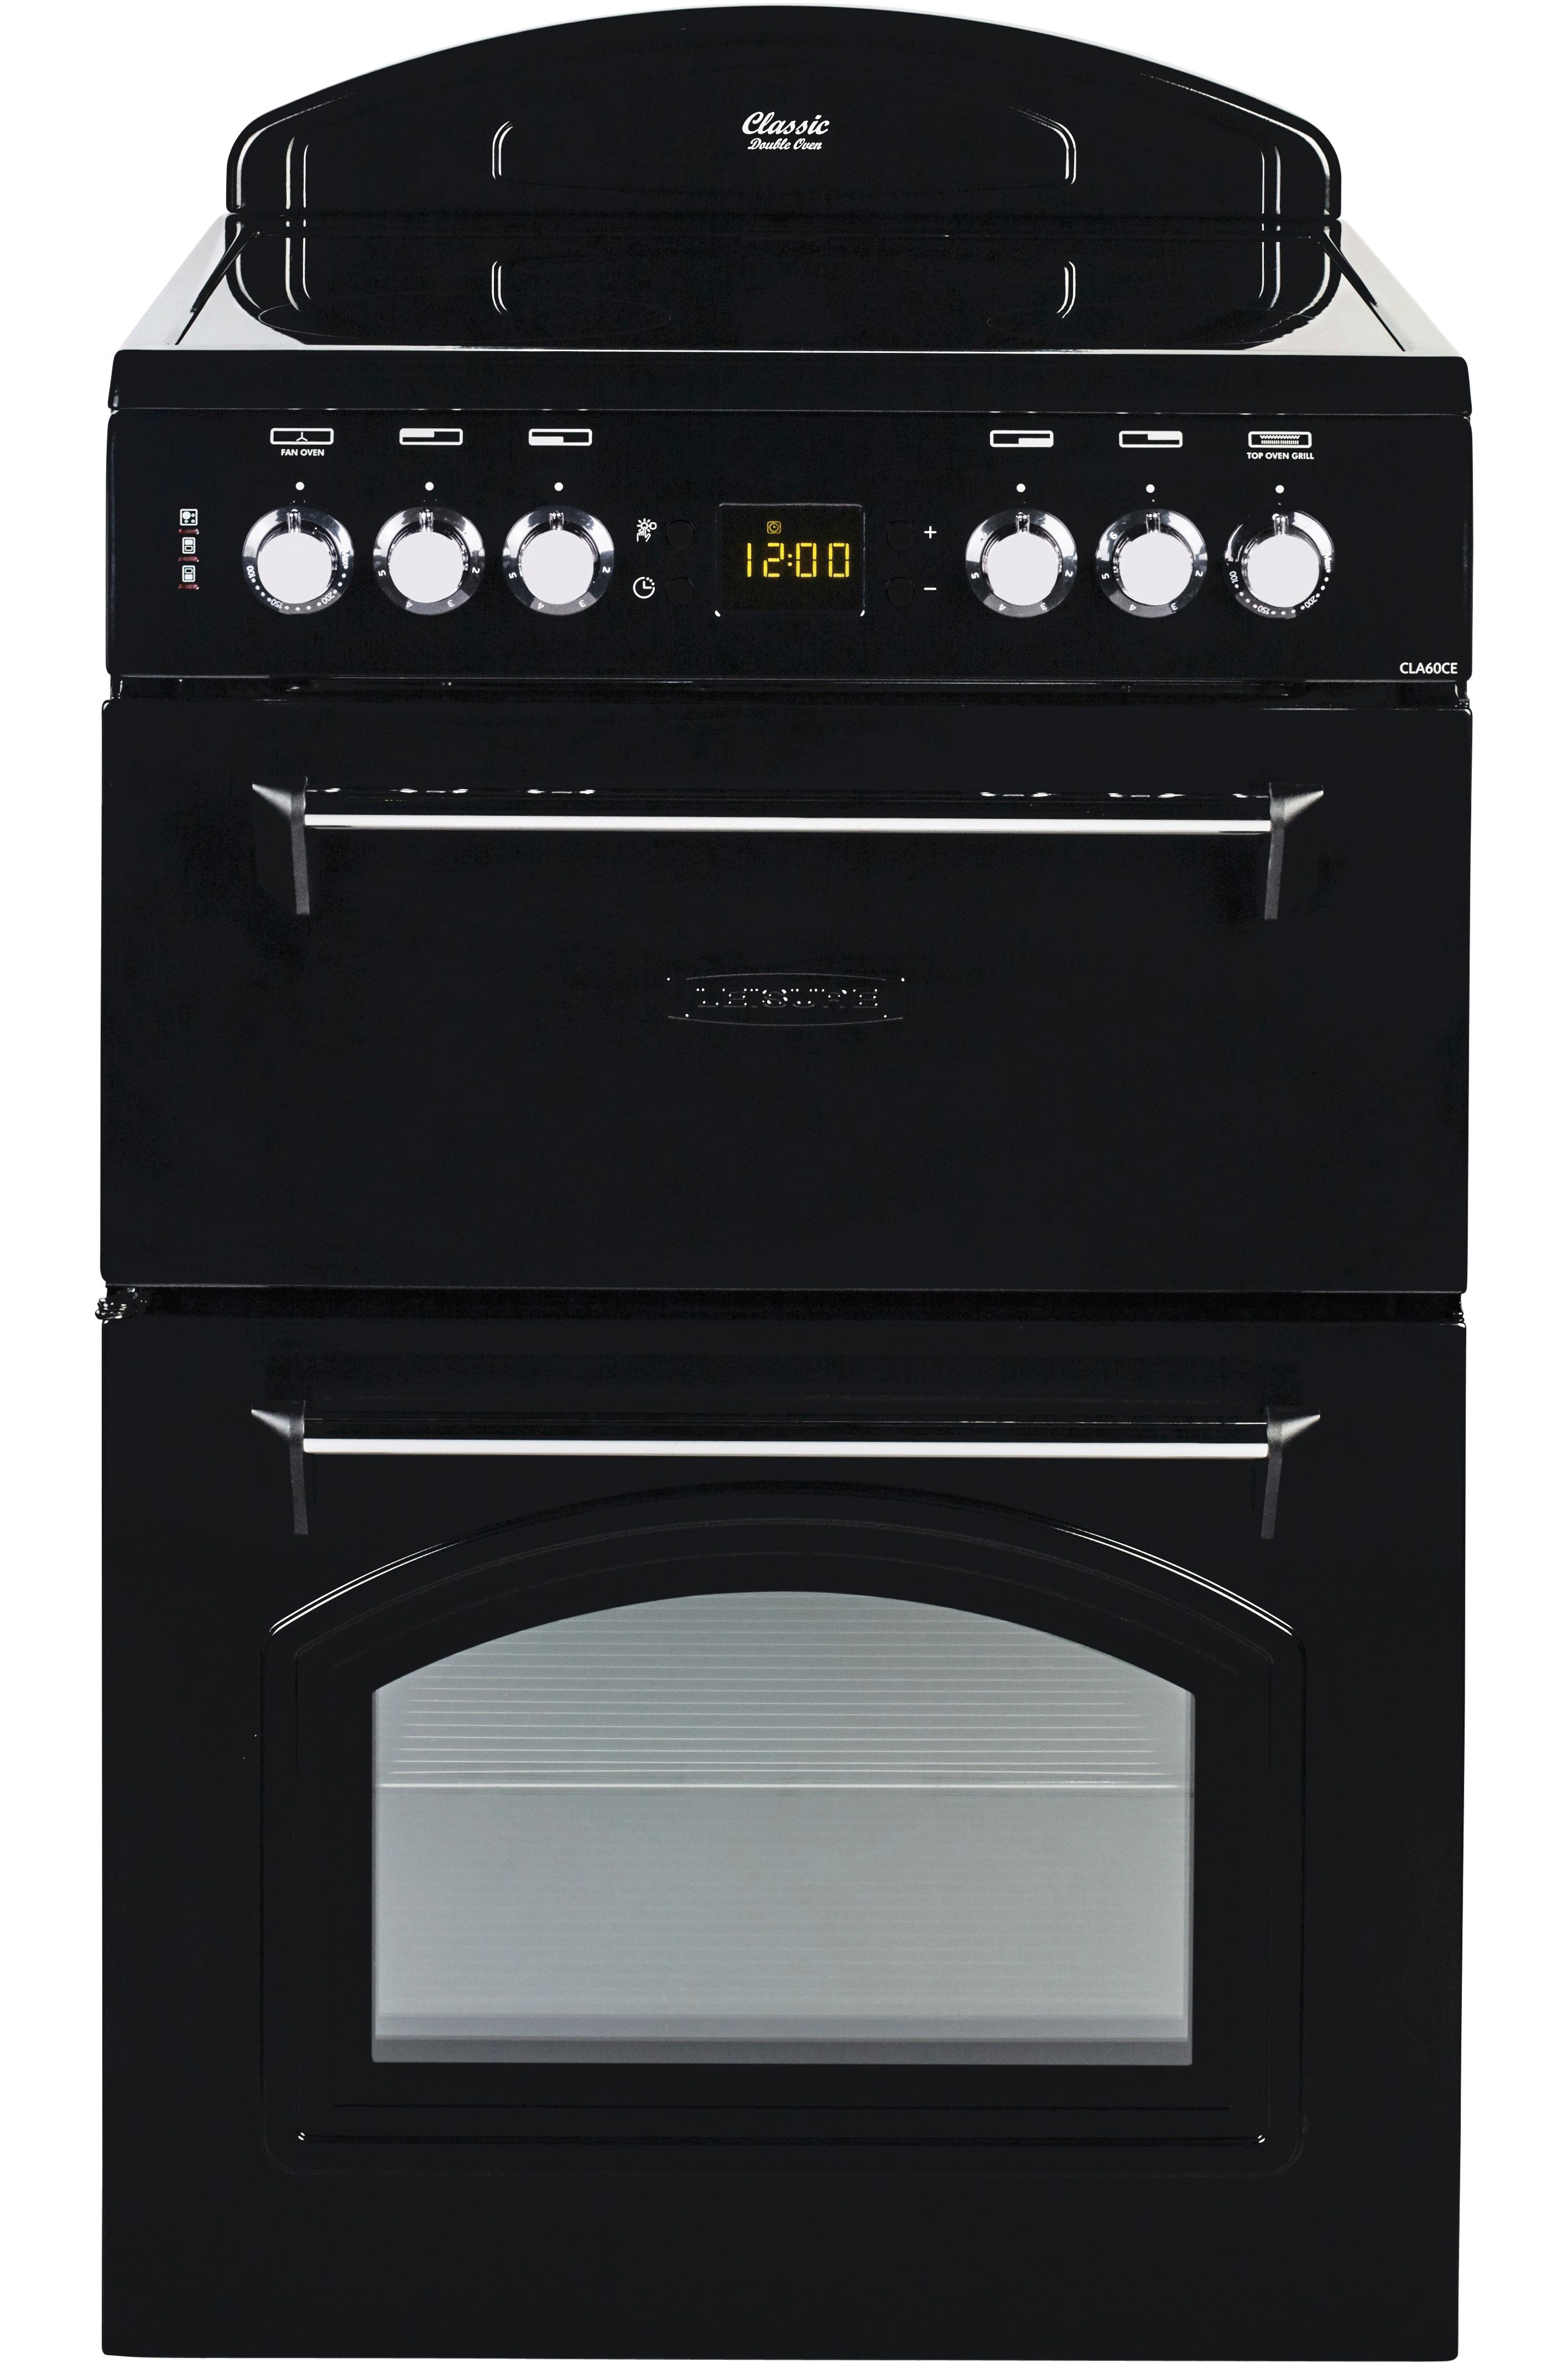 Image of Leisure Classic 60cm Electric Range Cooker - Black